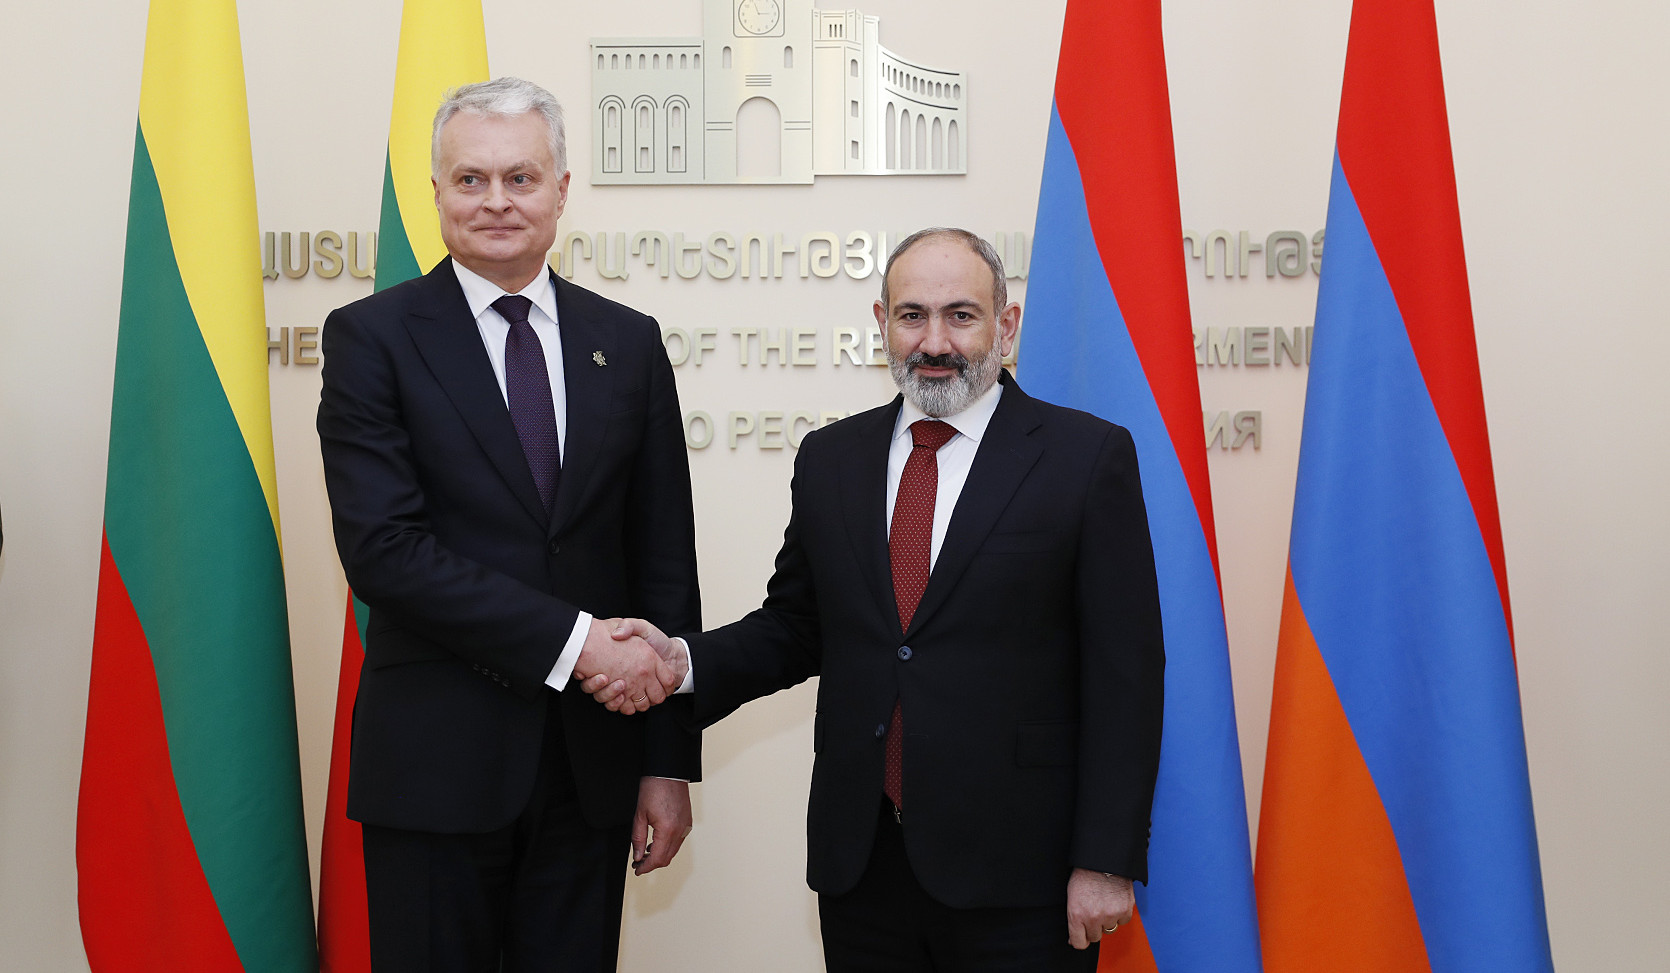 We started a very important dialogue that should continue: Prime Minister of Armenia to President of Lithuania